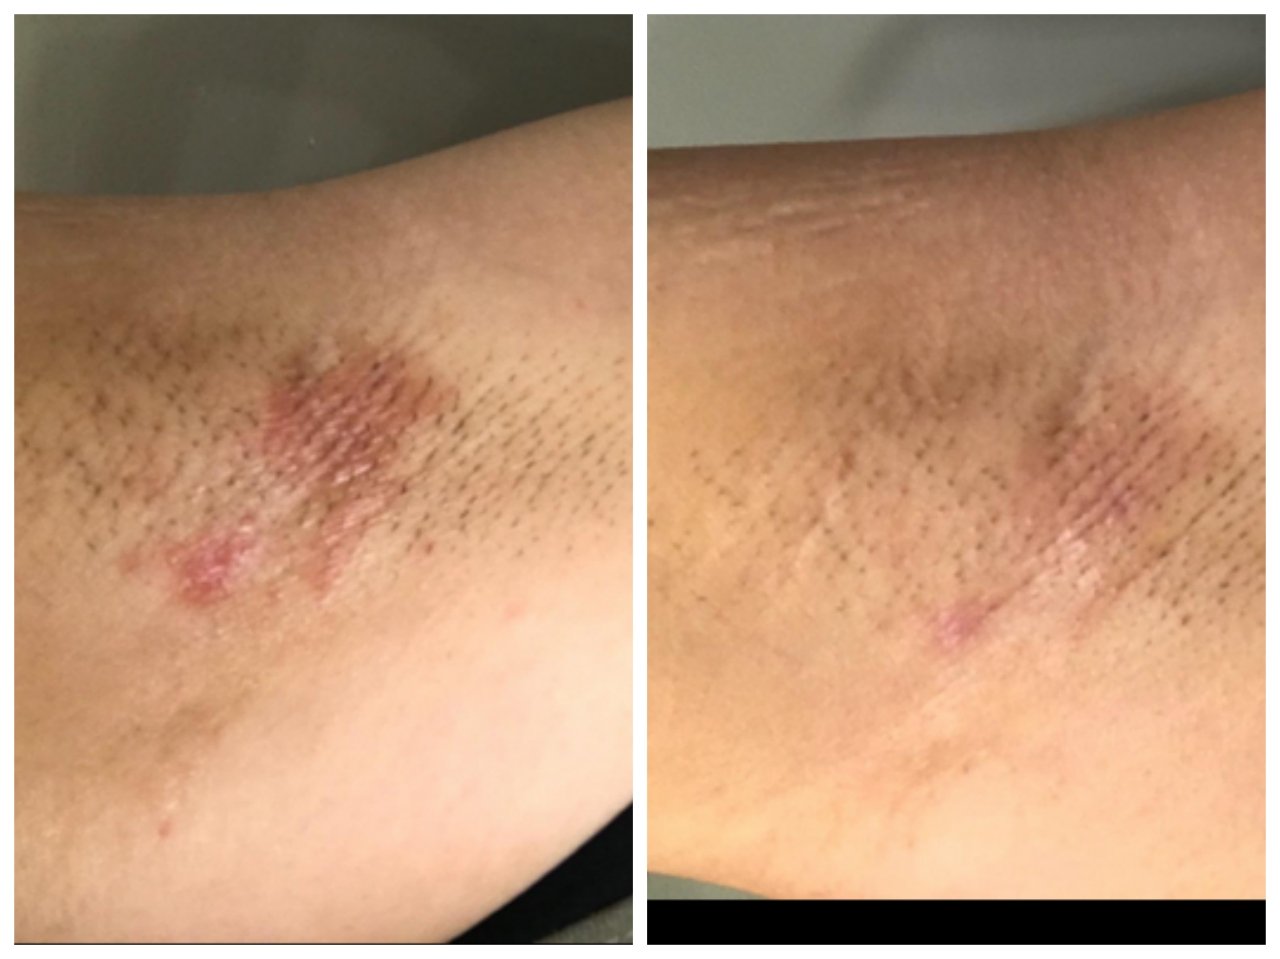 Phototherapy Psoriasis Before and After PICTURES (Side Effects)